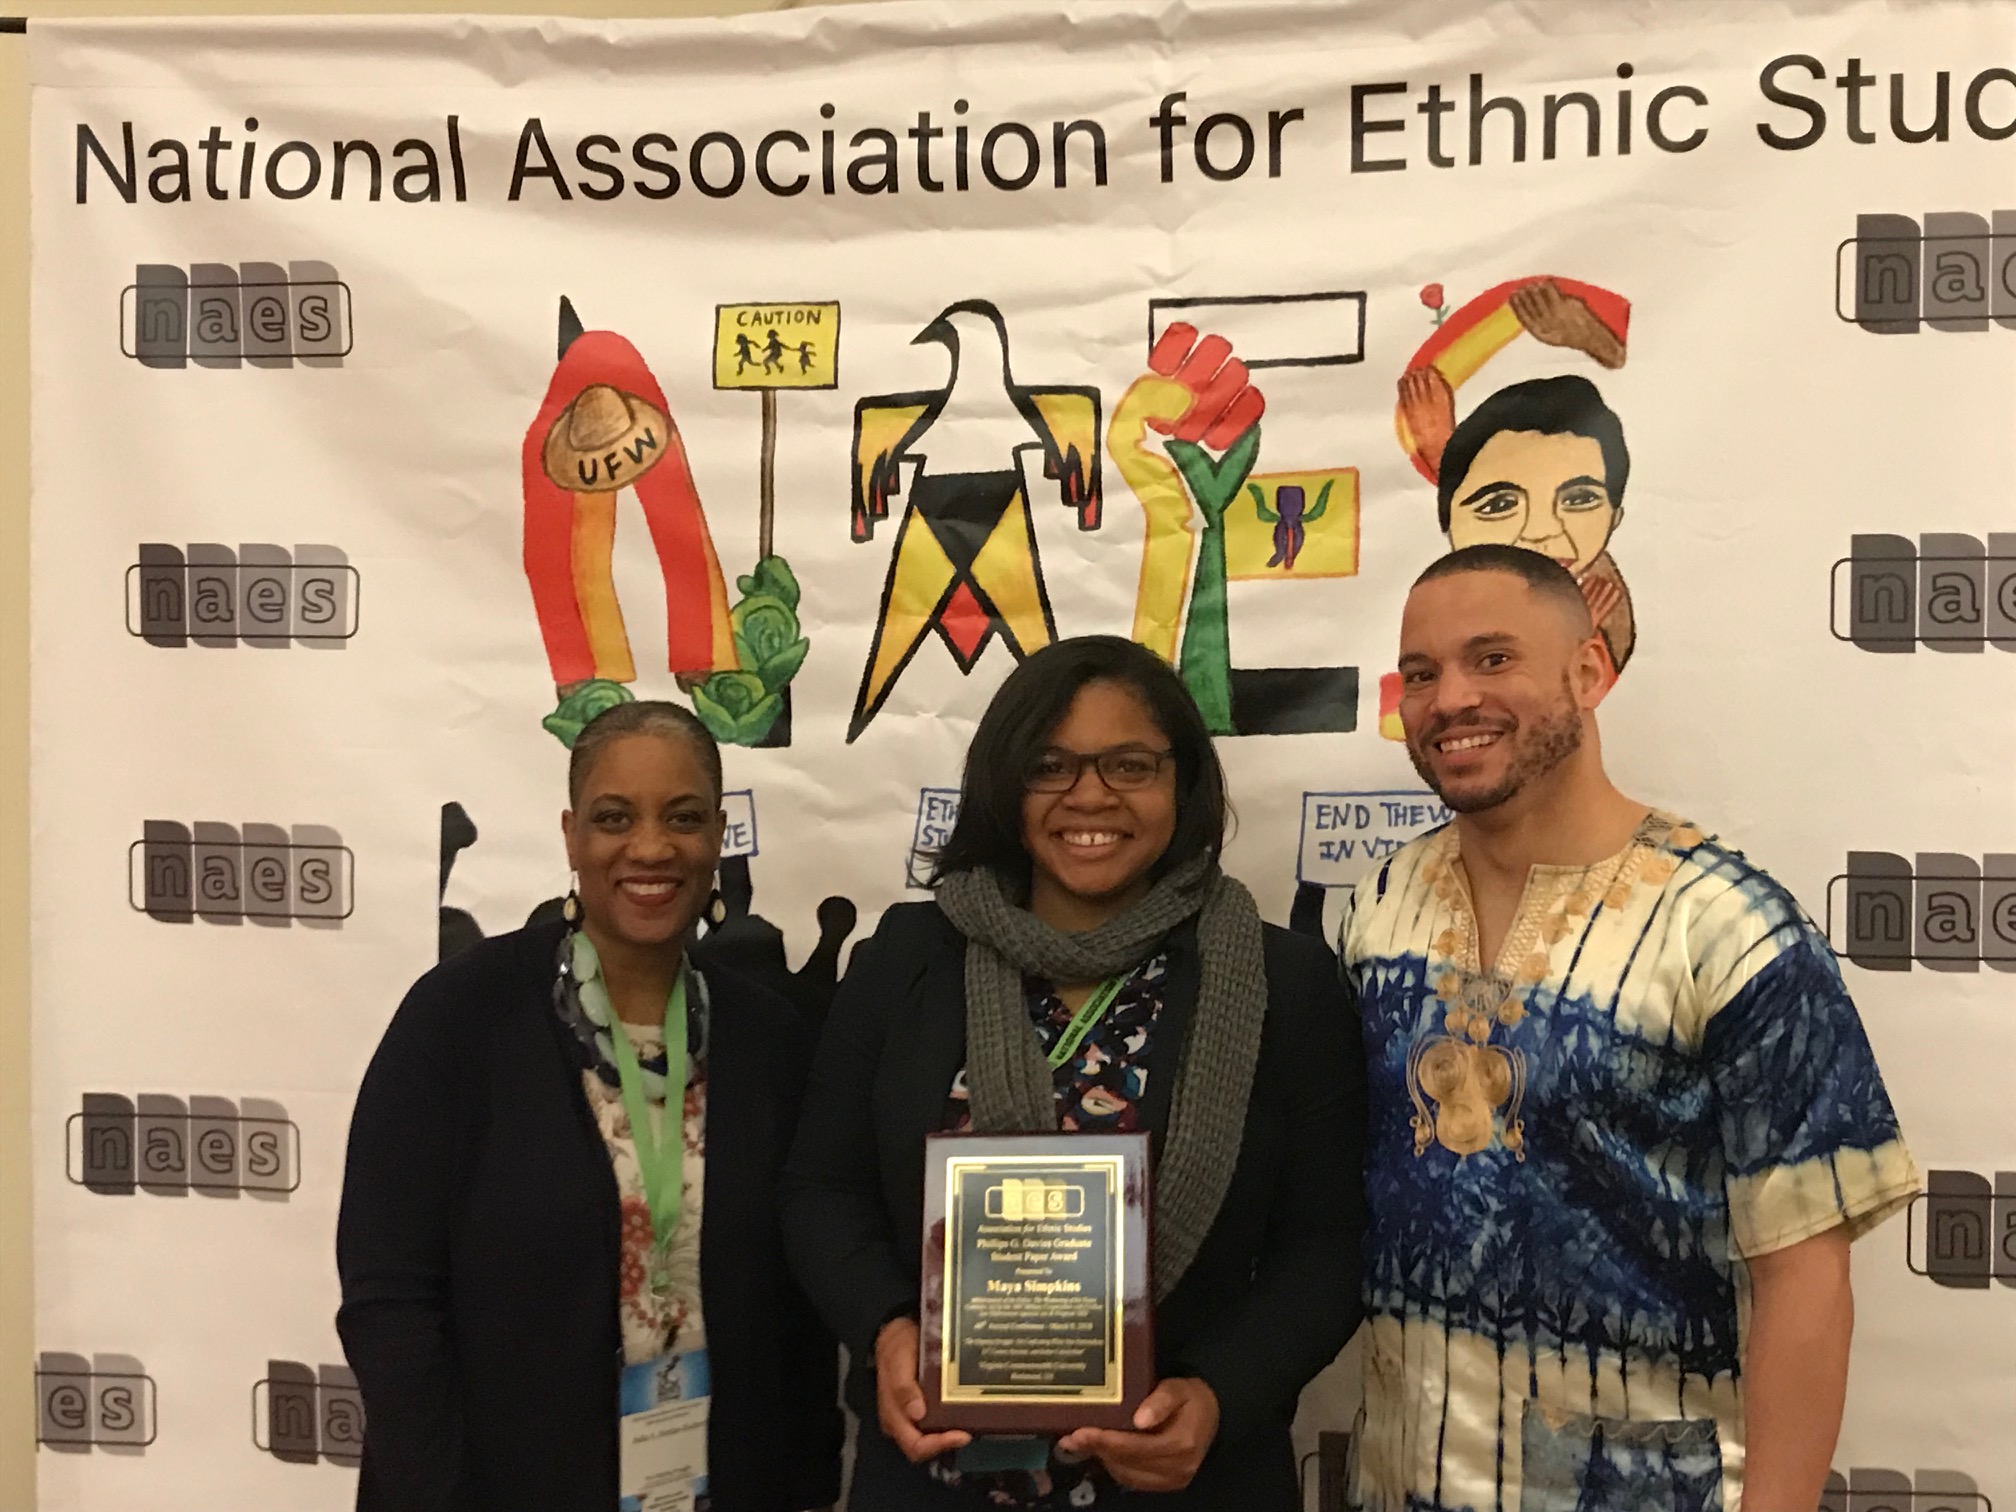 Wilder School M.P.A. Student Maya Simpkins (middle), who won the Phillips G. Davies Graduate Student Presentation Award at the 46th Annual Conference of the Association for Ethnic Studies, stands with Ravi Perry, Ph.D. (right), chair of the VCU Political Science Department and conference chair, and Julia Jordan-Zachery, president of AES.